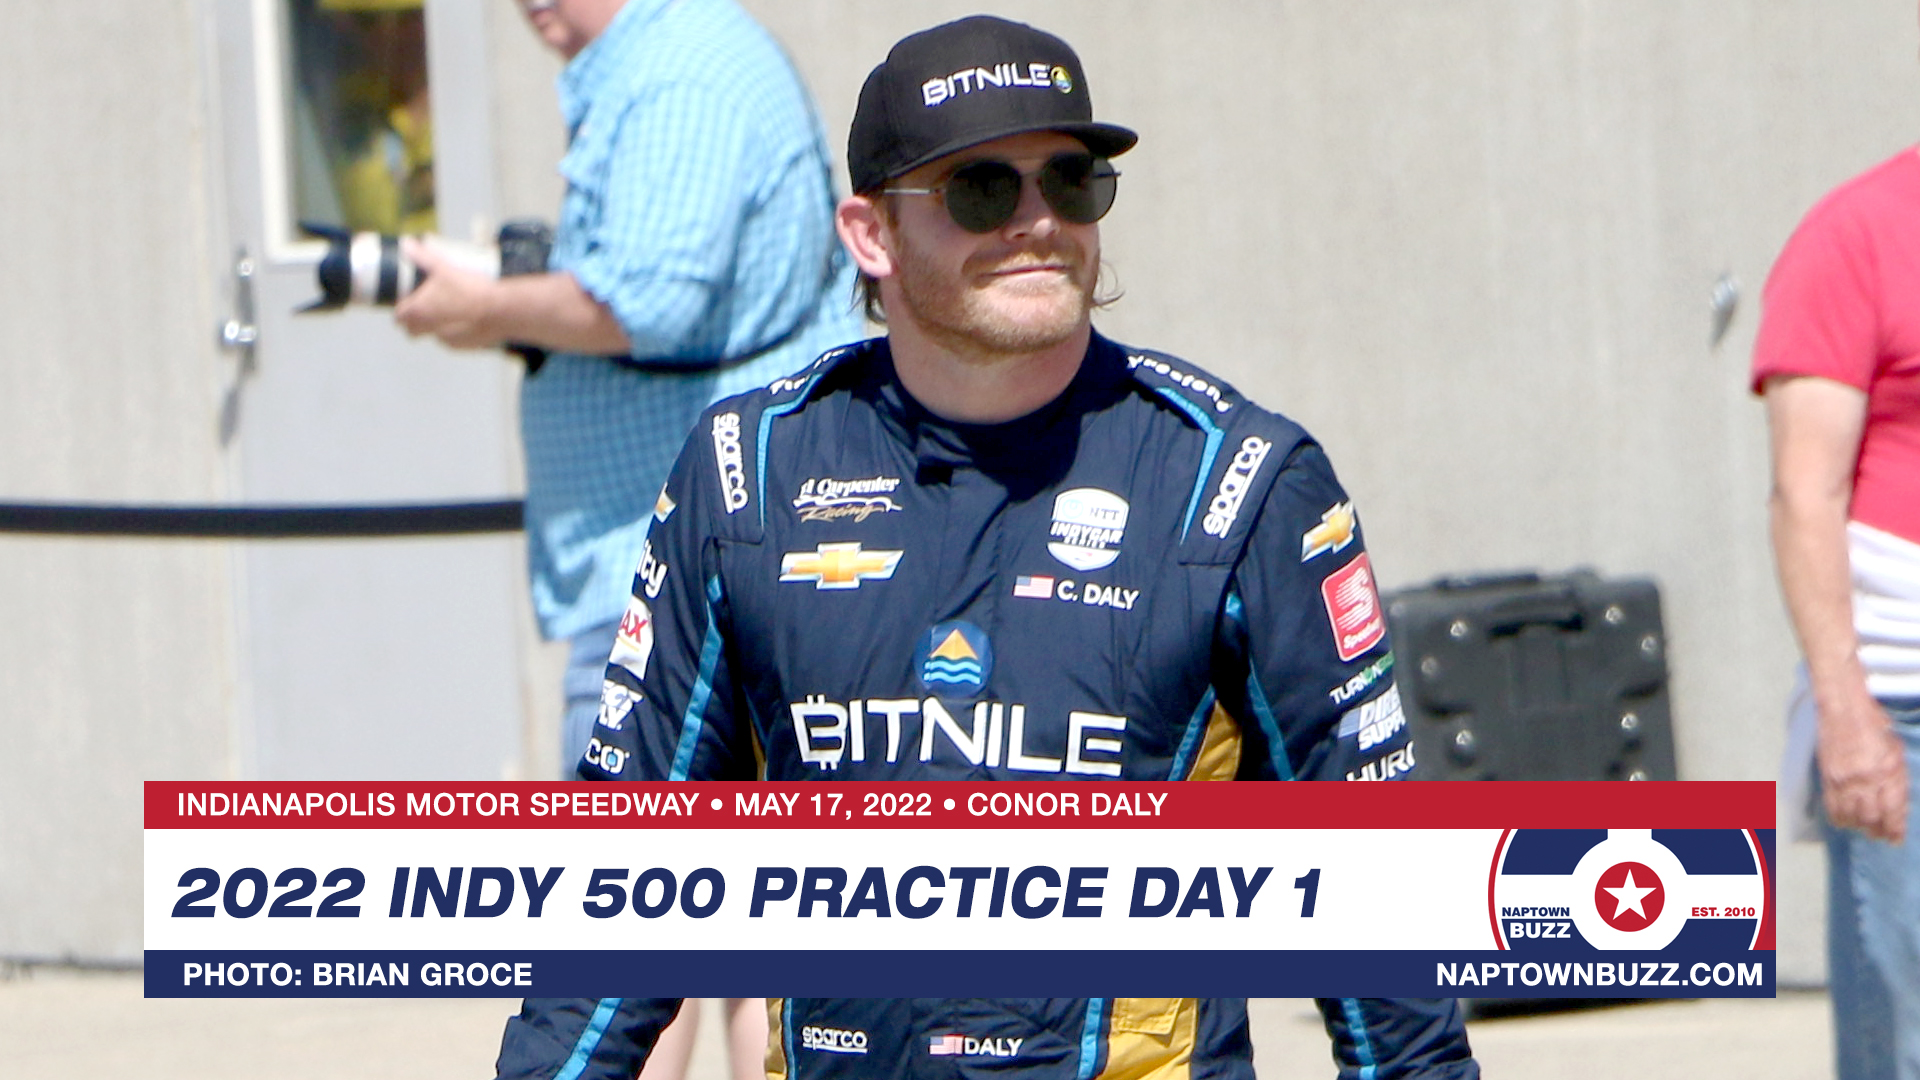 Conor Daly on May 17, 2022, at Indianapolis Motor Speedway